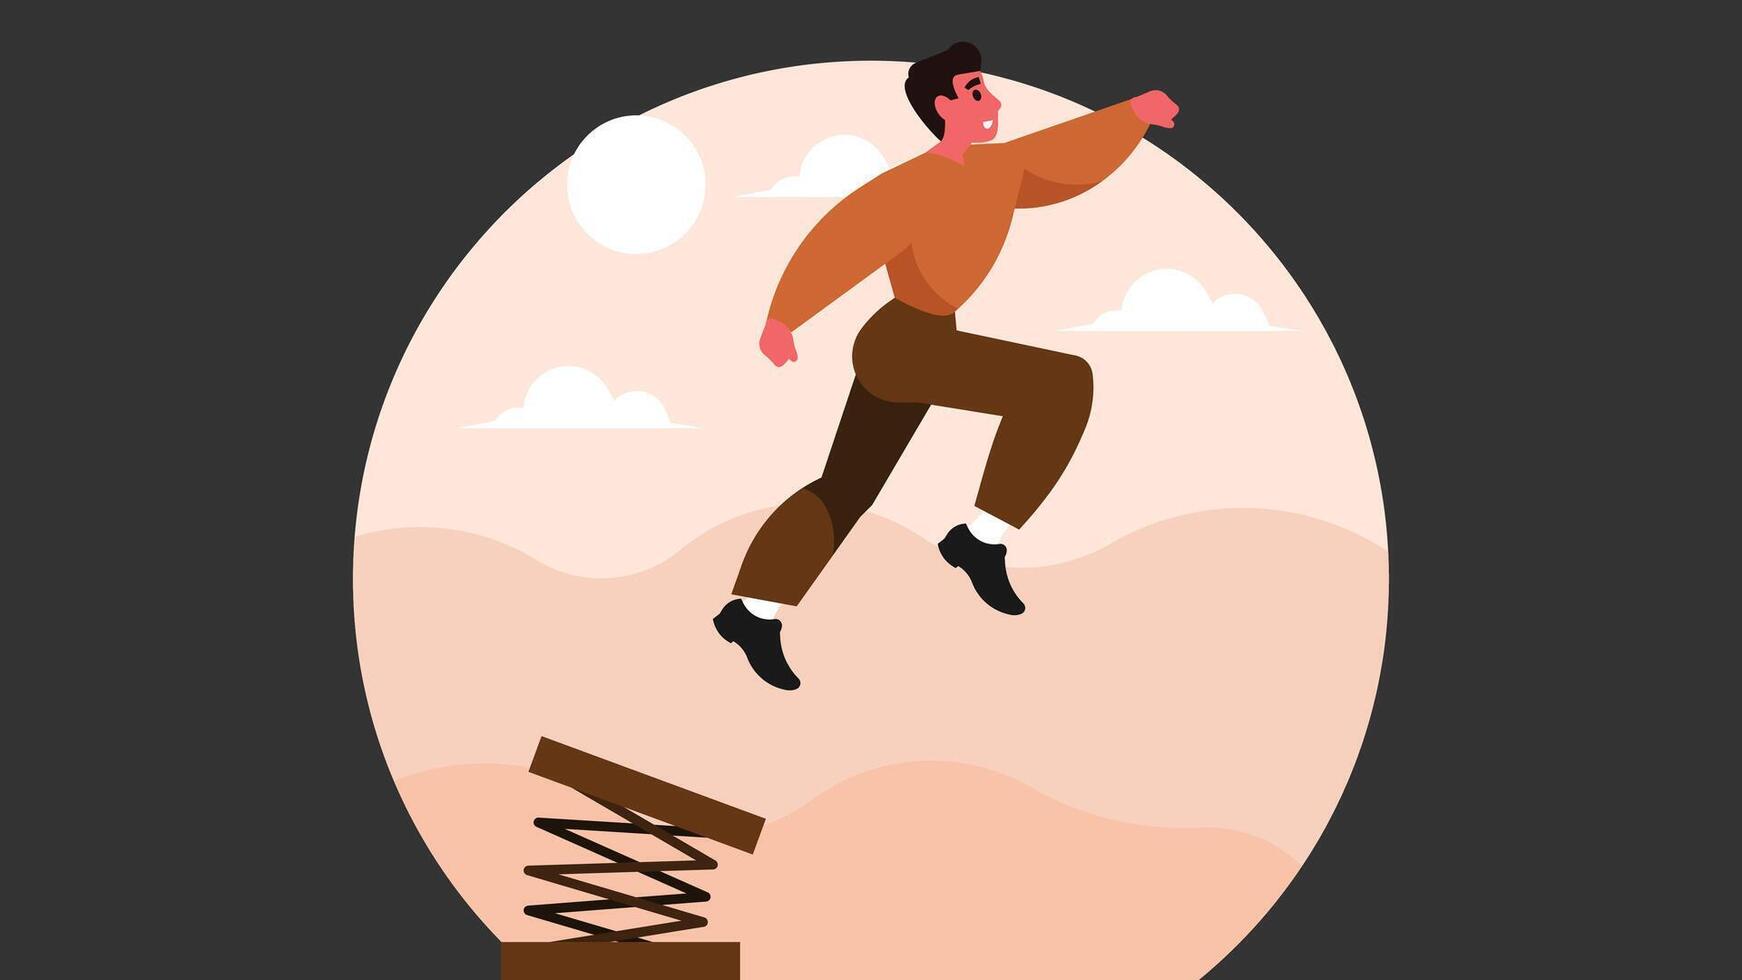 Abstract person jumps into sky for visionary concept vector